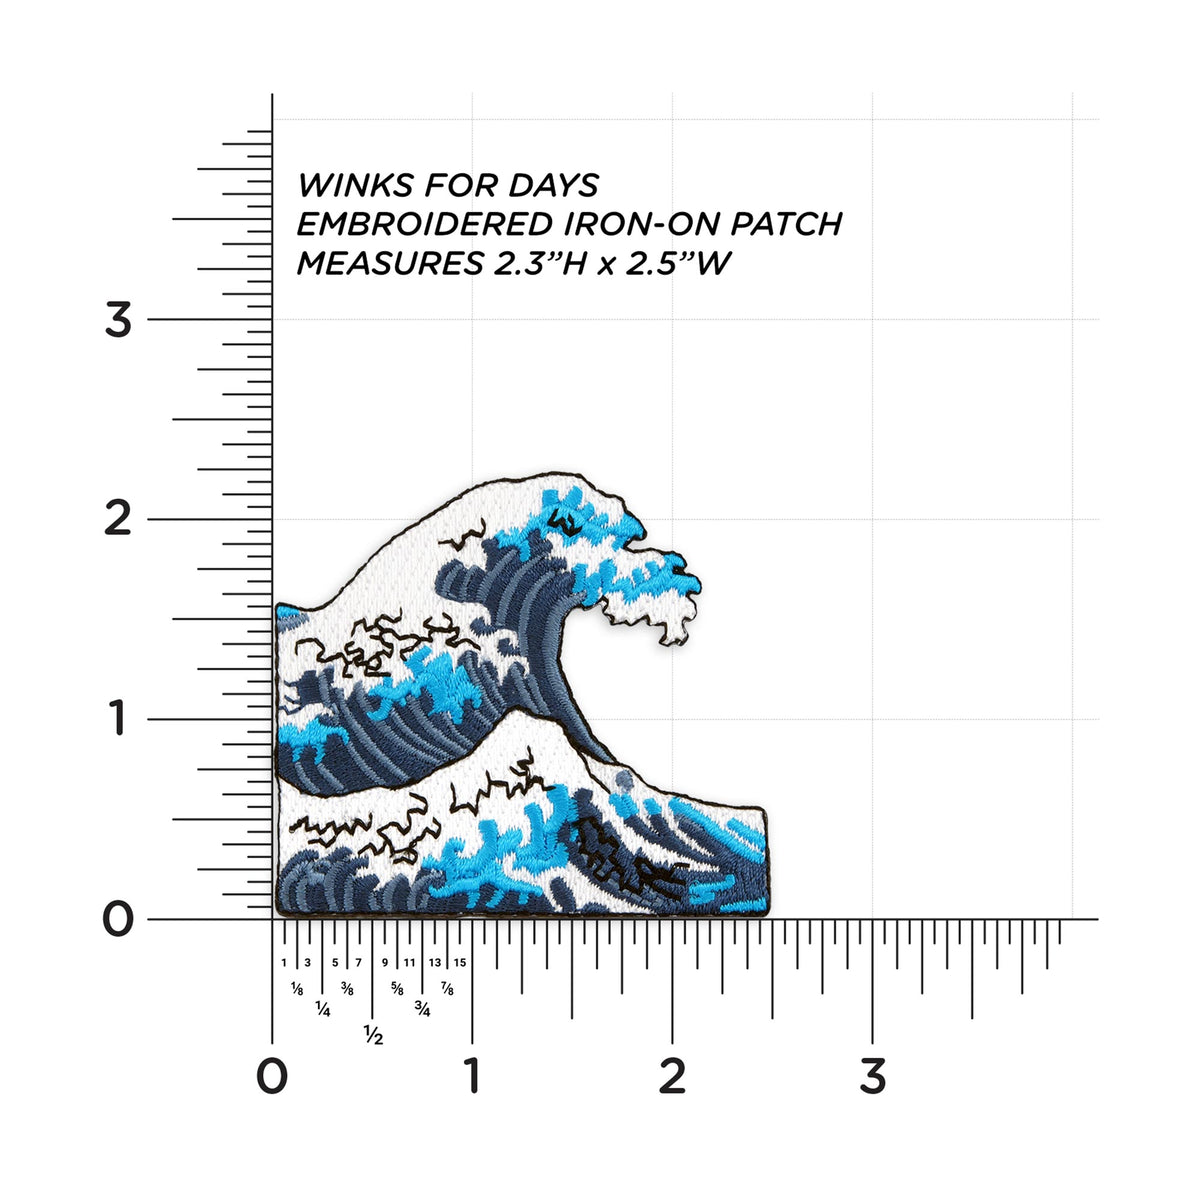 Sea Wave Embroidery Patches For Men - Clothing Repair & Decoration